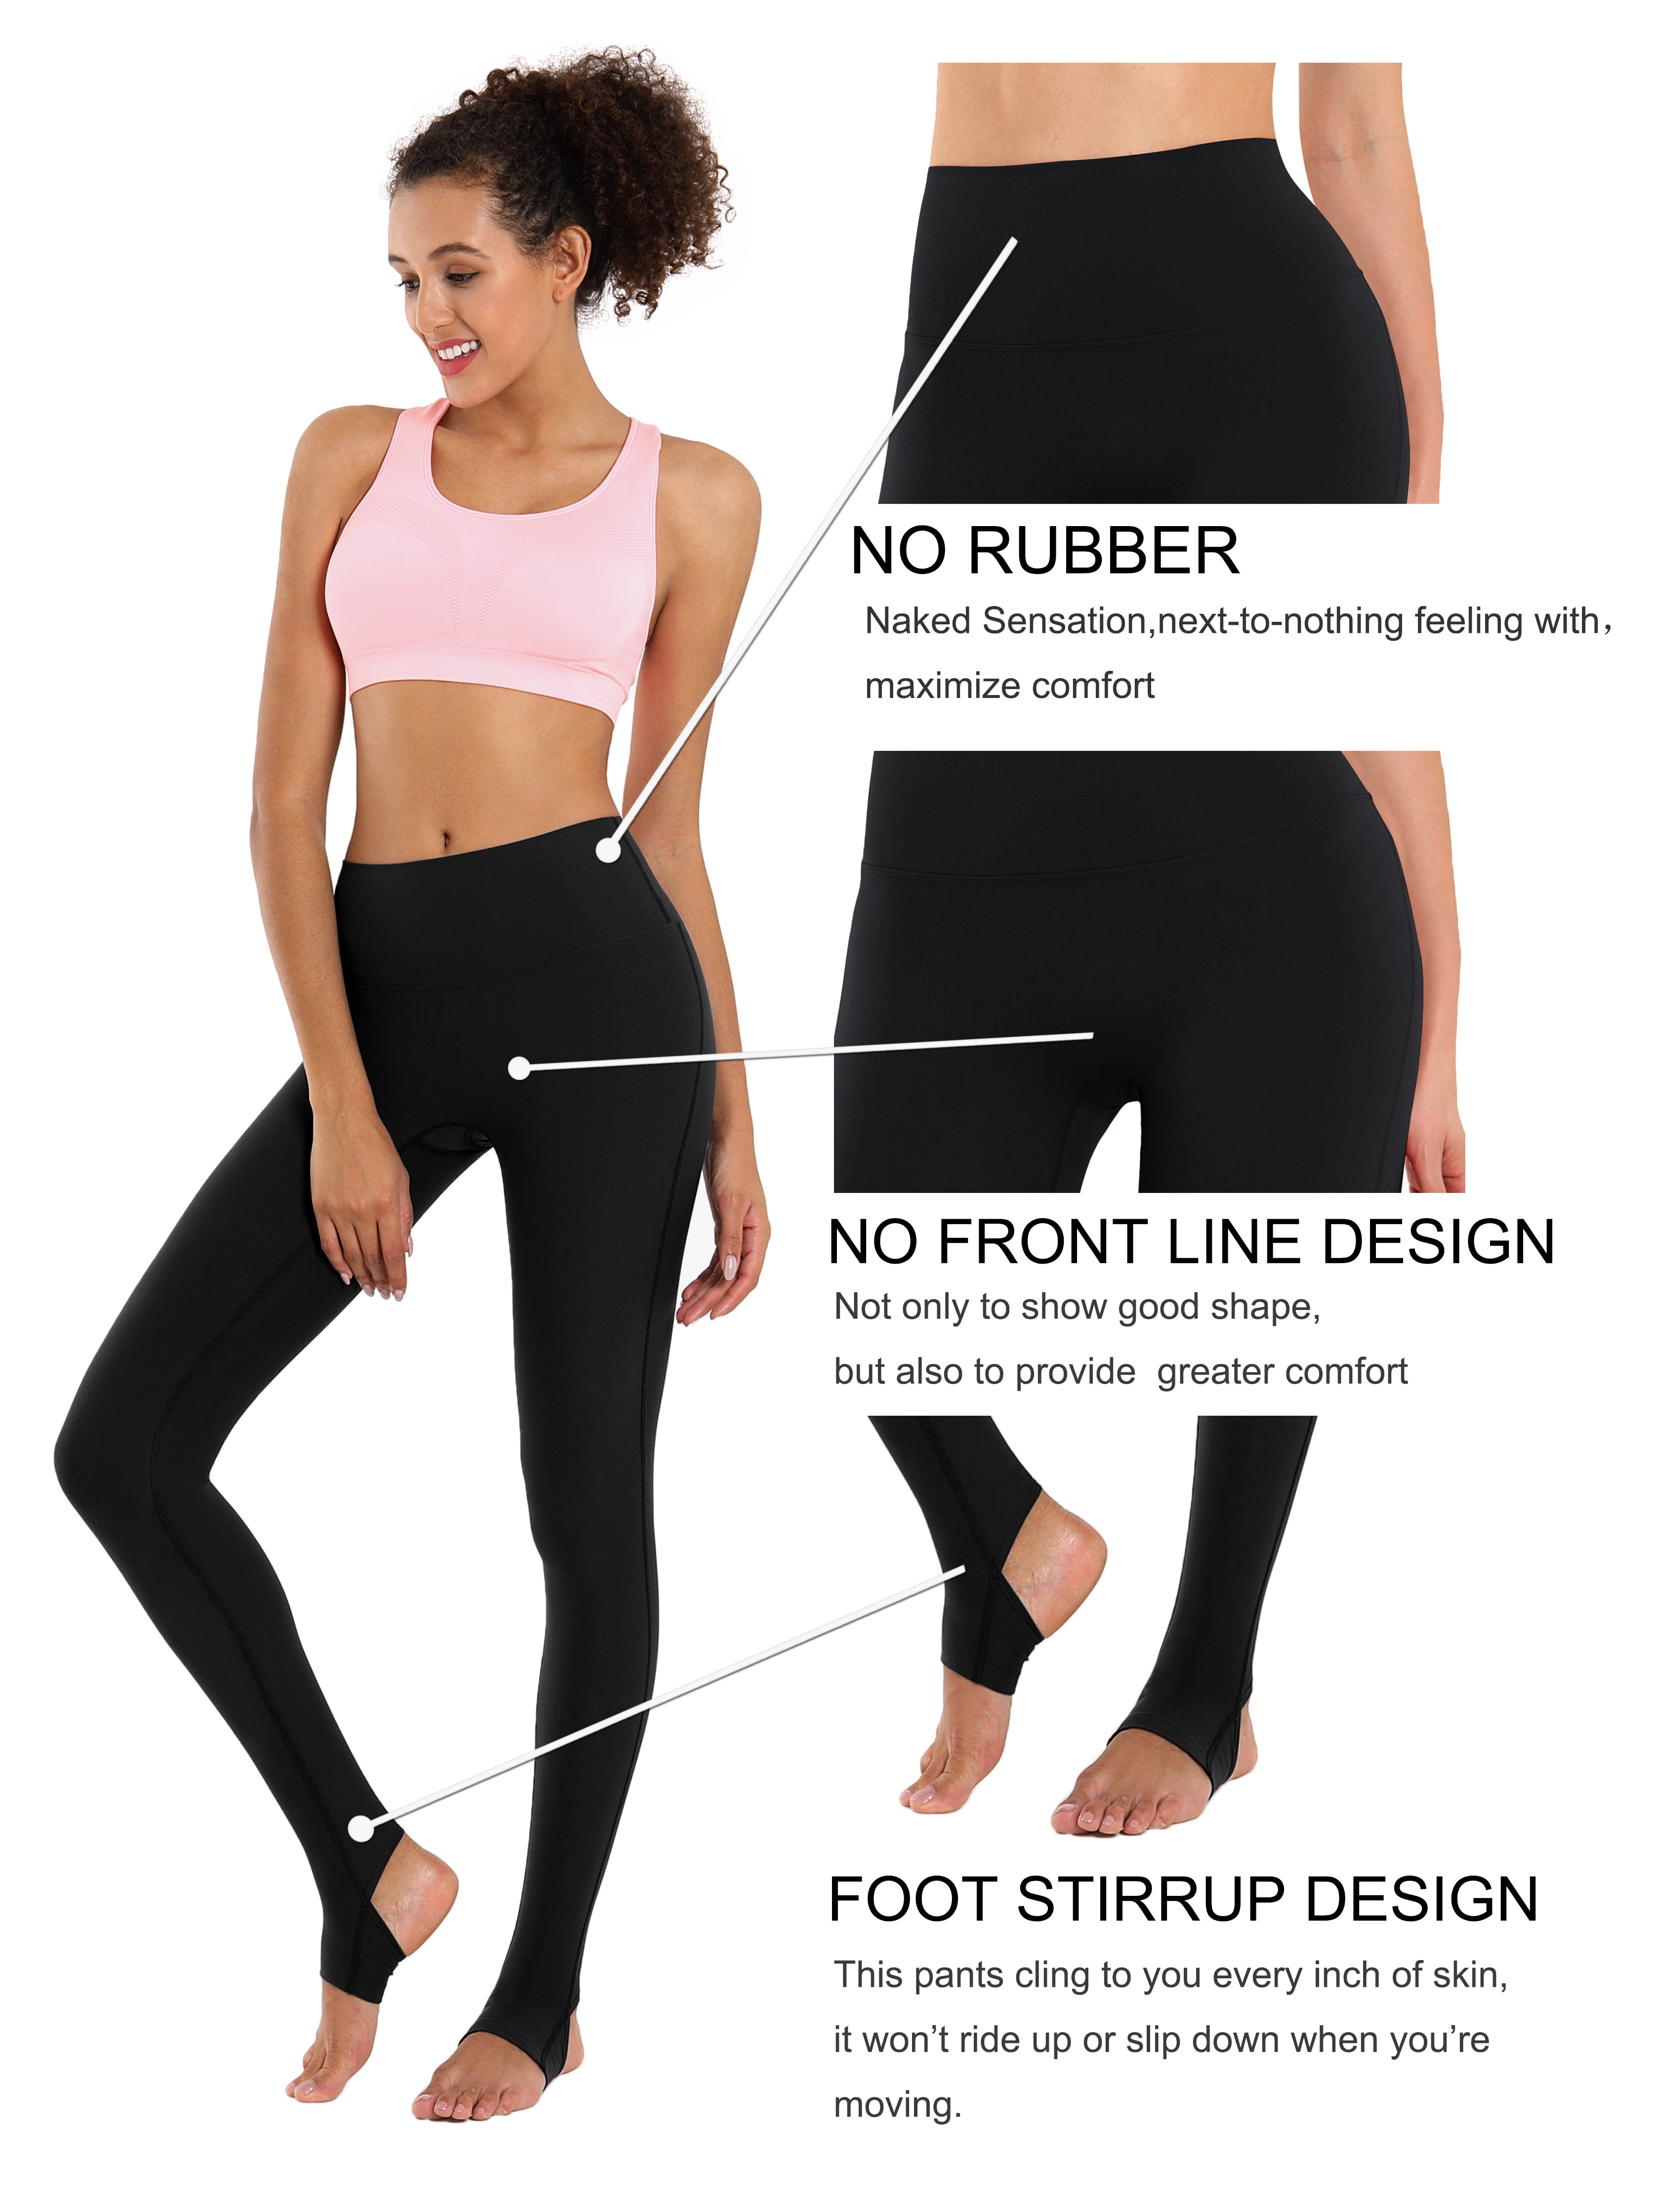 Over the Heel Yoga Pants black Over the Heel Design 87%Nylon/13%Spandex Fabric doesn't attract lint easily 4-way stretch No see-through Moisture-wicking Tummy control